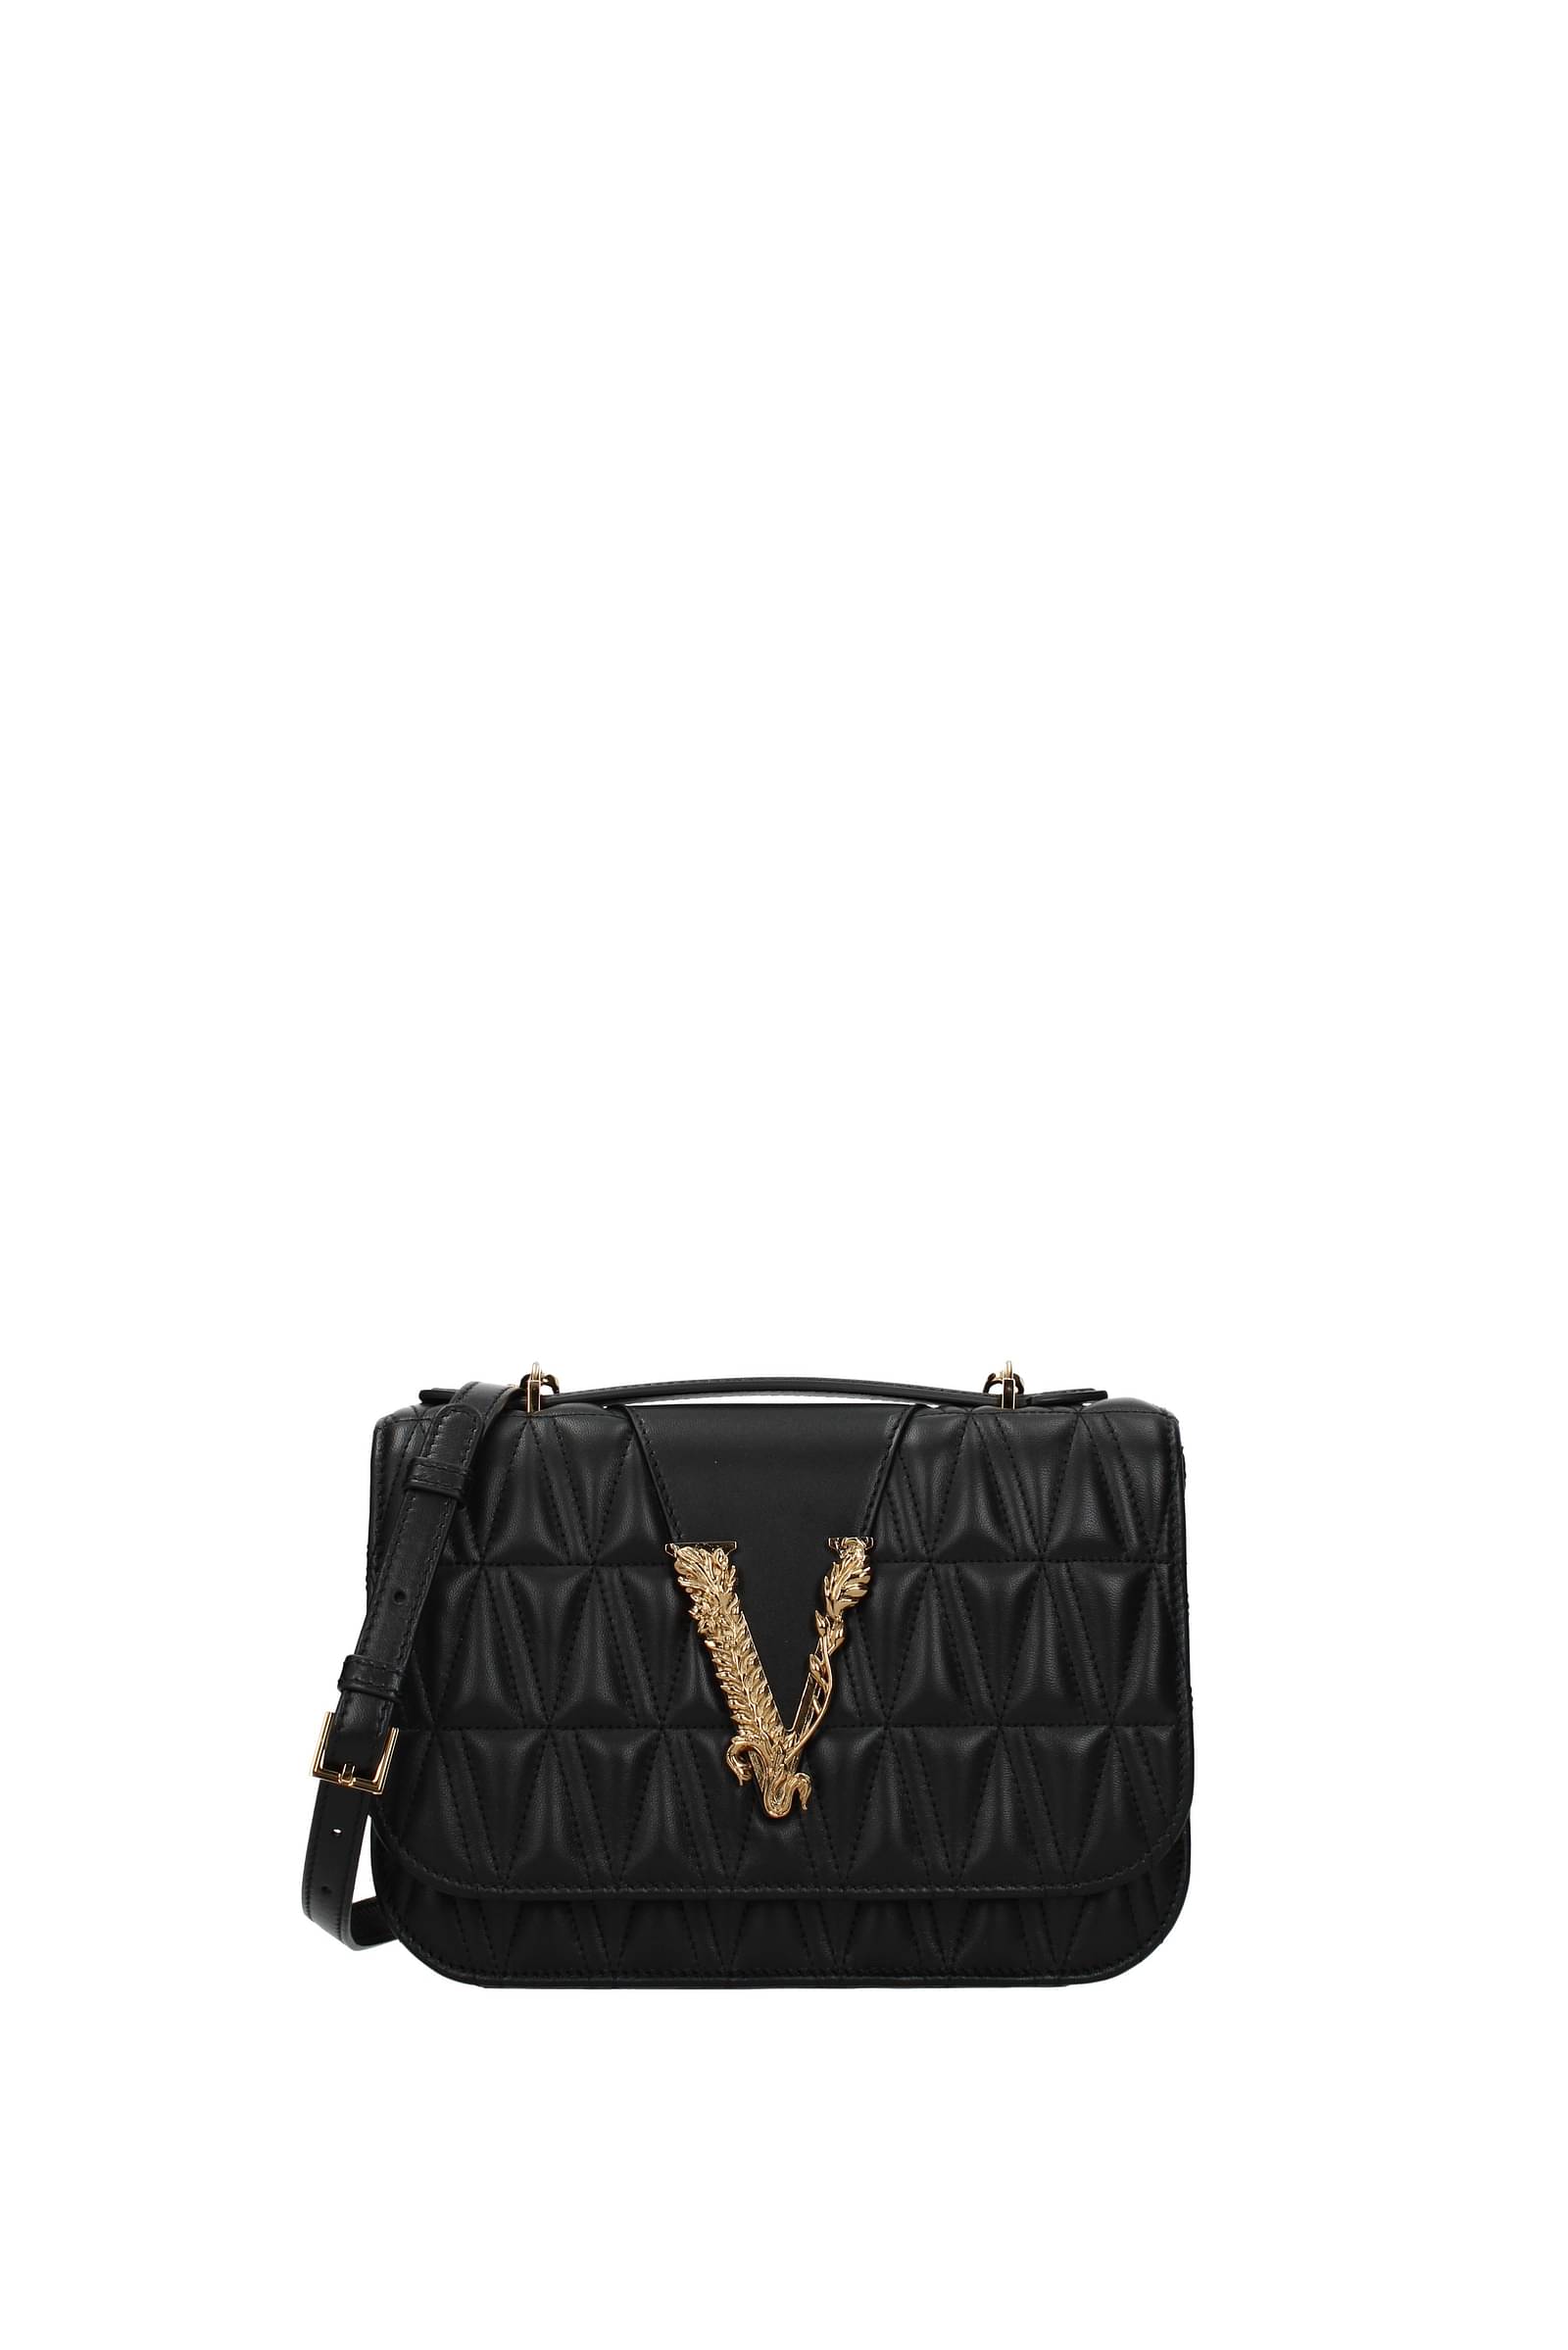 versace outlet online